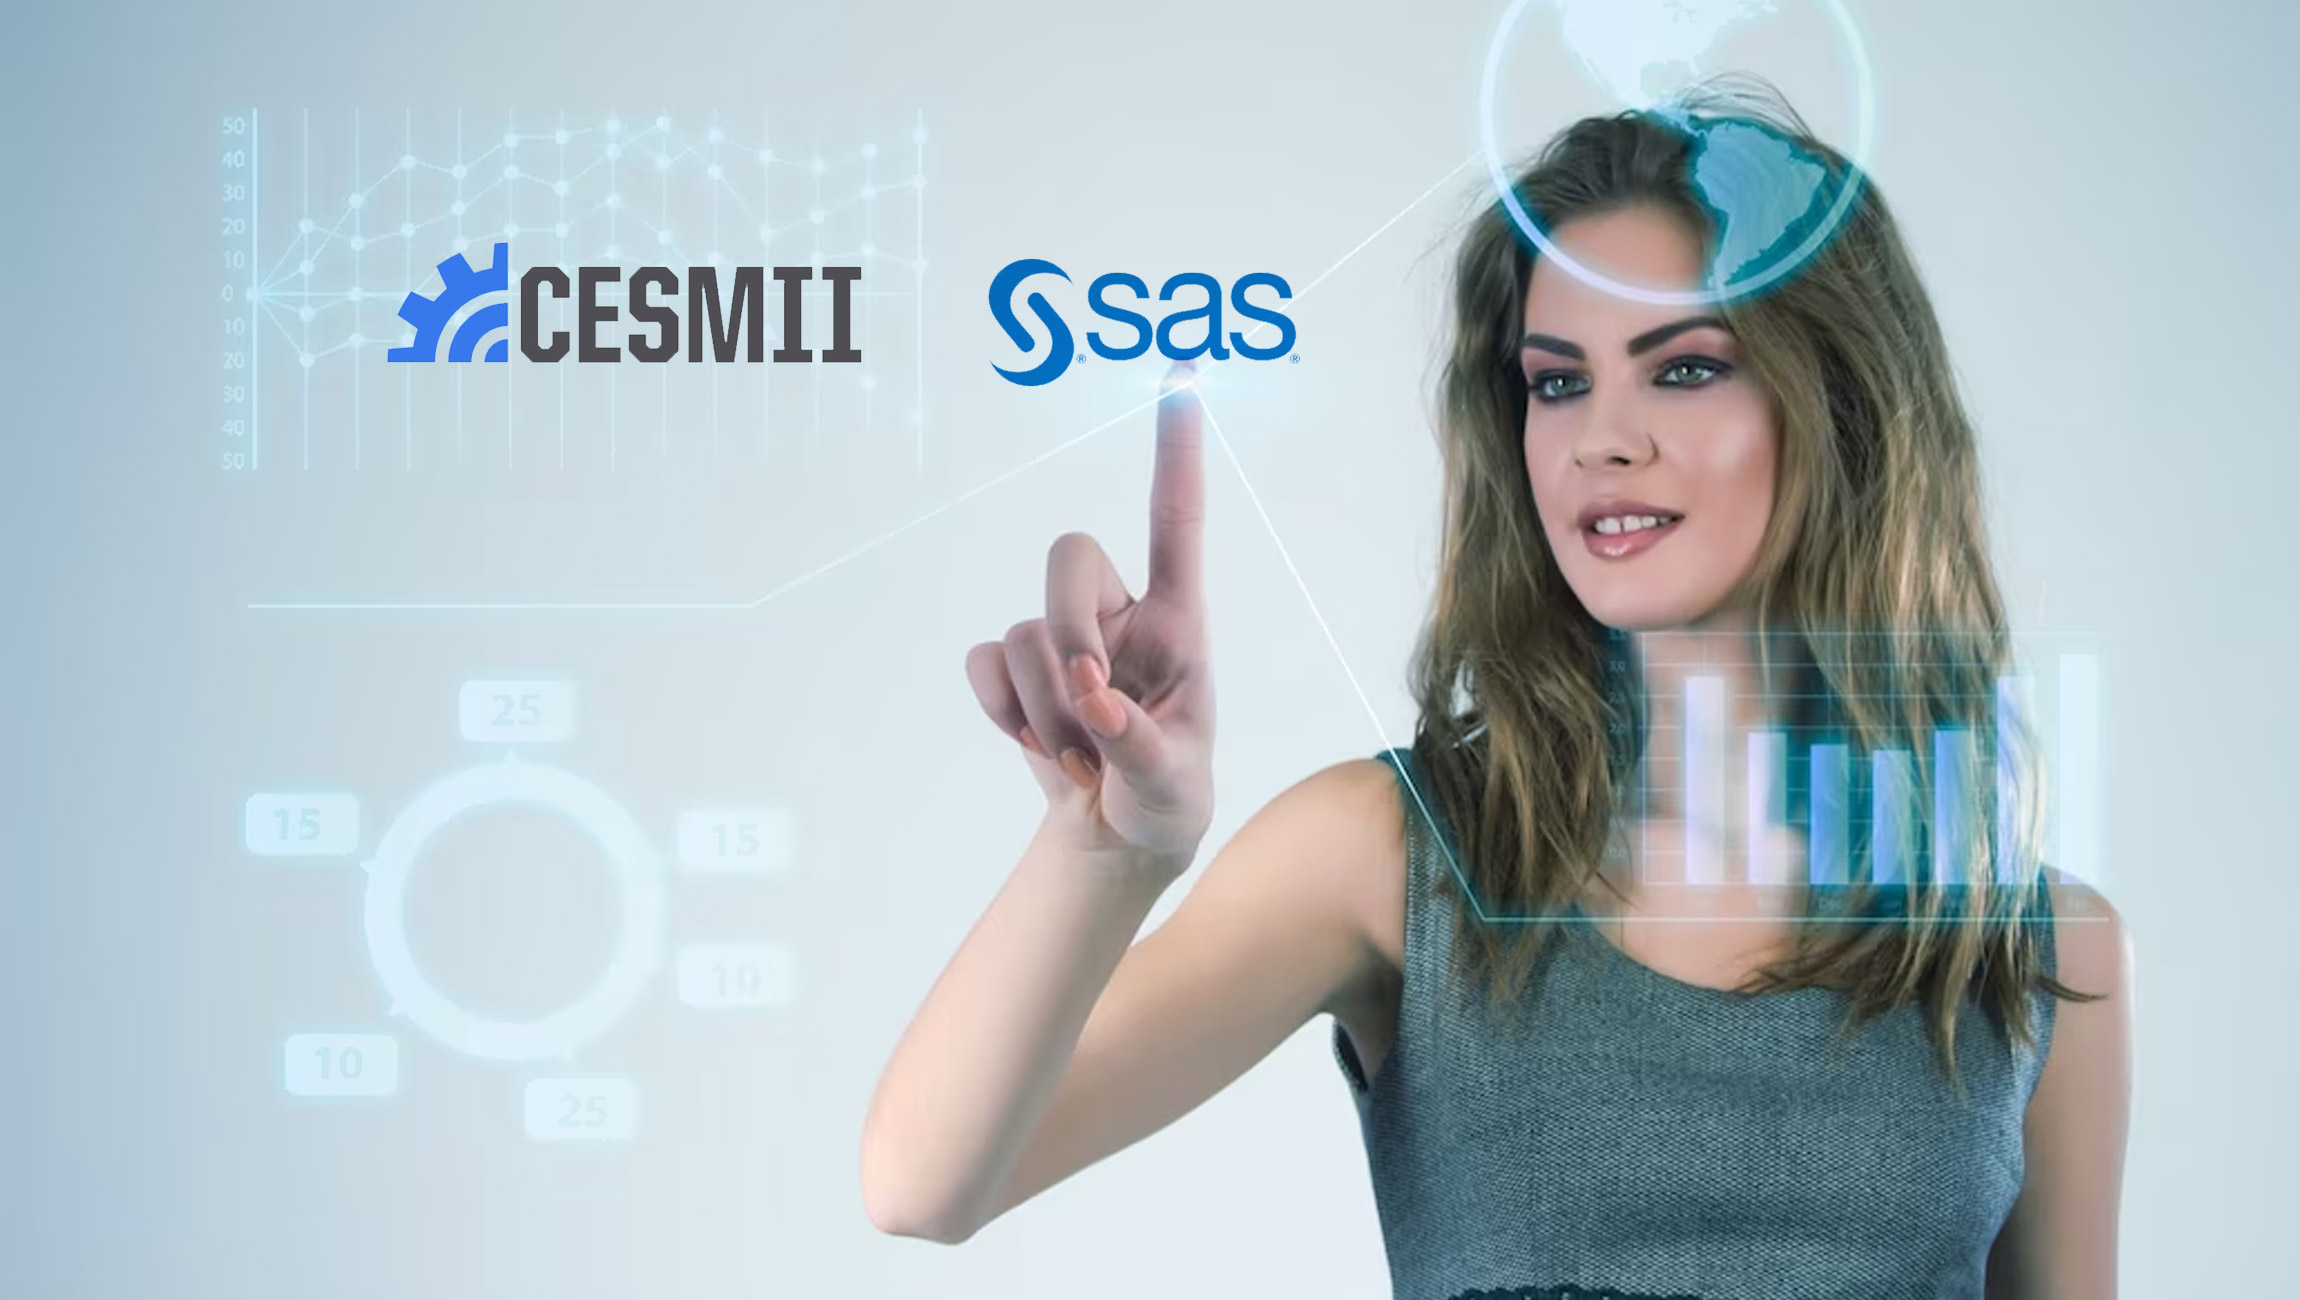 SAS Joins CESMII To Accelerate the Adoption of Analytics And AI